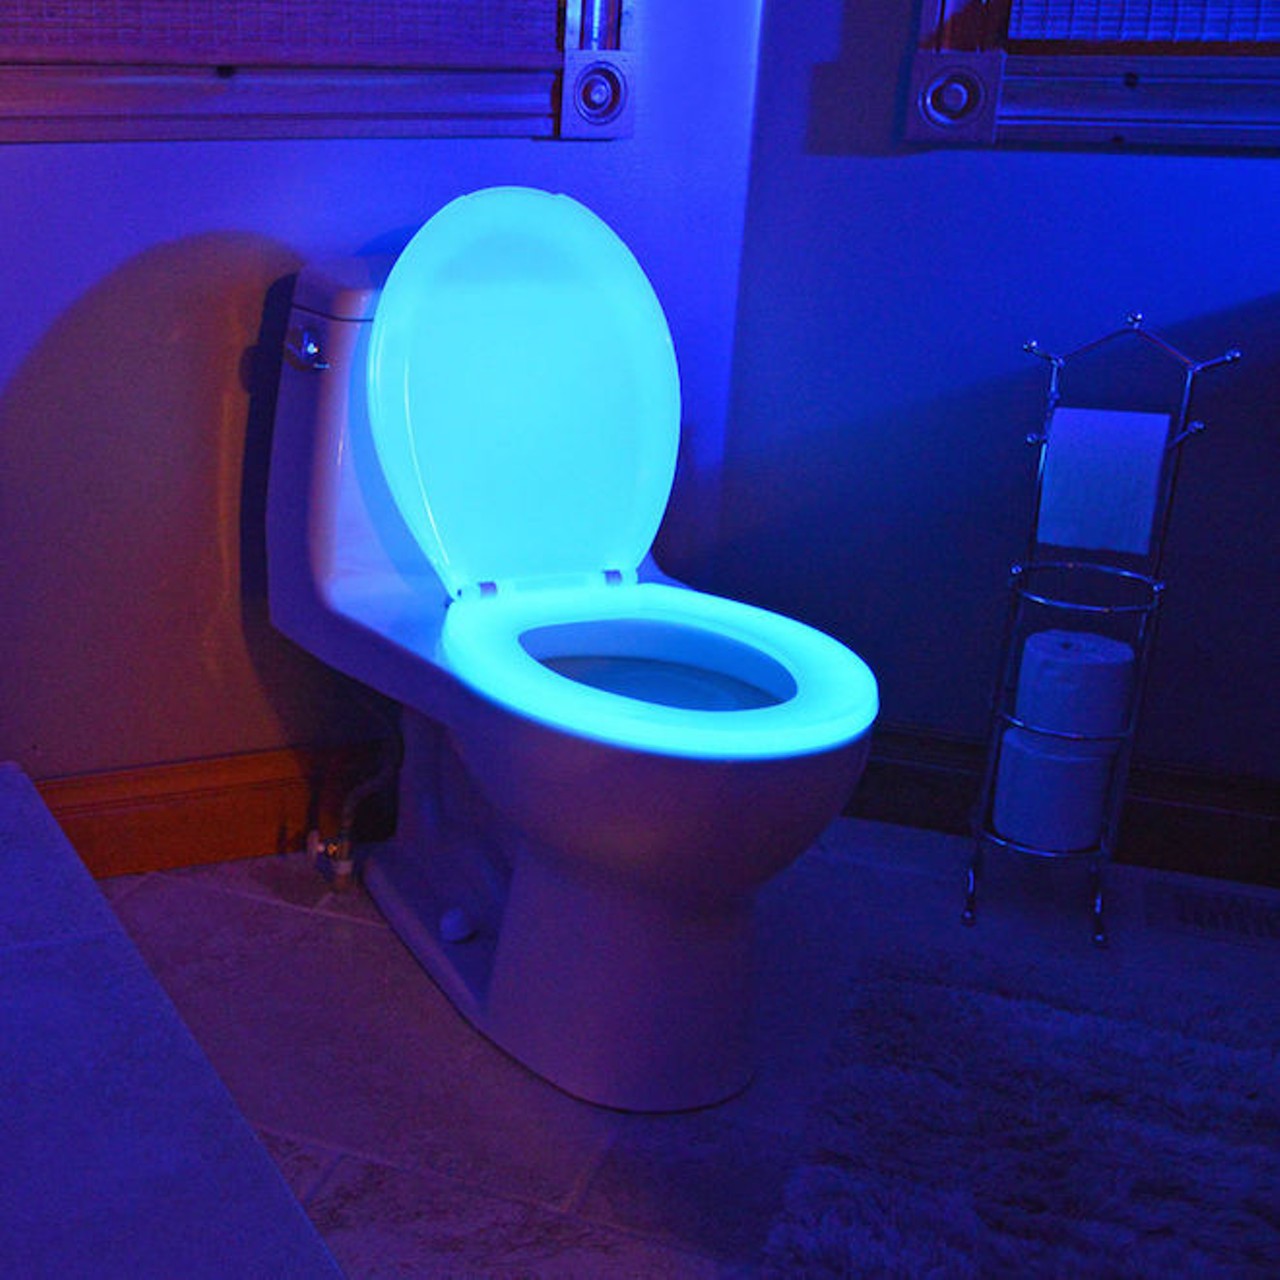 A glow-in-the-dark toilet seat.